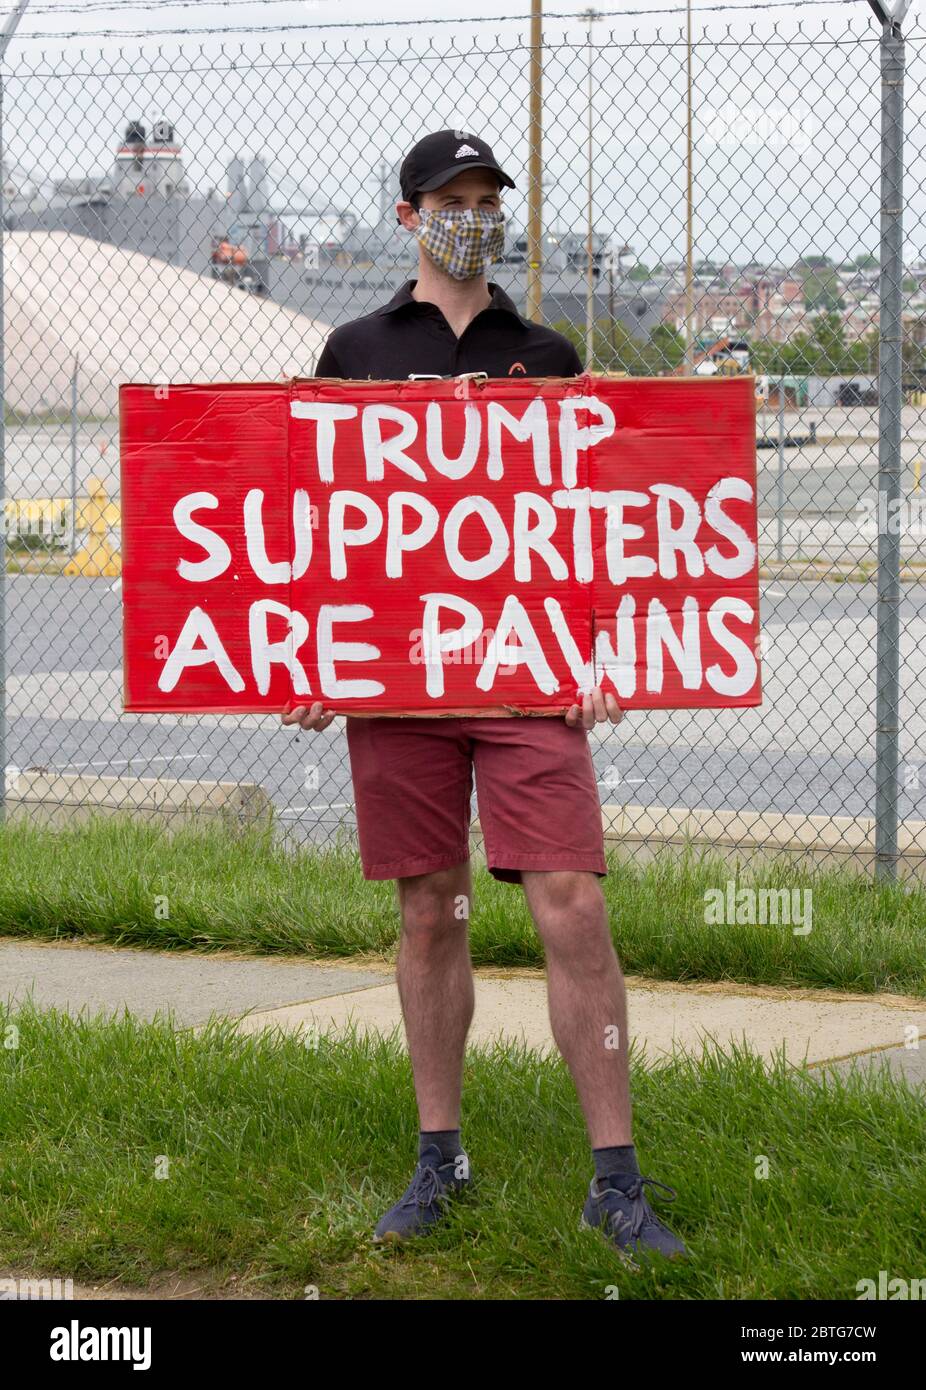 Baltimore, Maryland, USA. 25th May, 2020. Man with protective face mask holds sign reading 'Trump Supporters Are Pawns' outside historic Fort McHenry in Baltimore, Maryland, where President Donald Trump and First Lady Melania Trump visit on Memorial Day 2020 despite urging from Baltimore Mayor Bernard C. “Jack” Young to cancel to avoid setting a bad example while the city remains under a stay-at-home order (with exemptions including some outdoor exercise), and to avoid being an expensive drain on public safety resources. Kay Howell/Alamy Live News Stock Photo